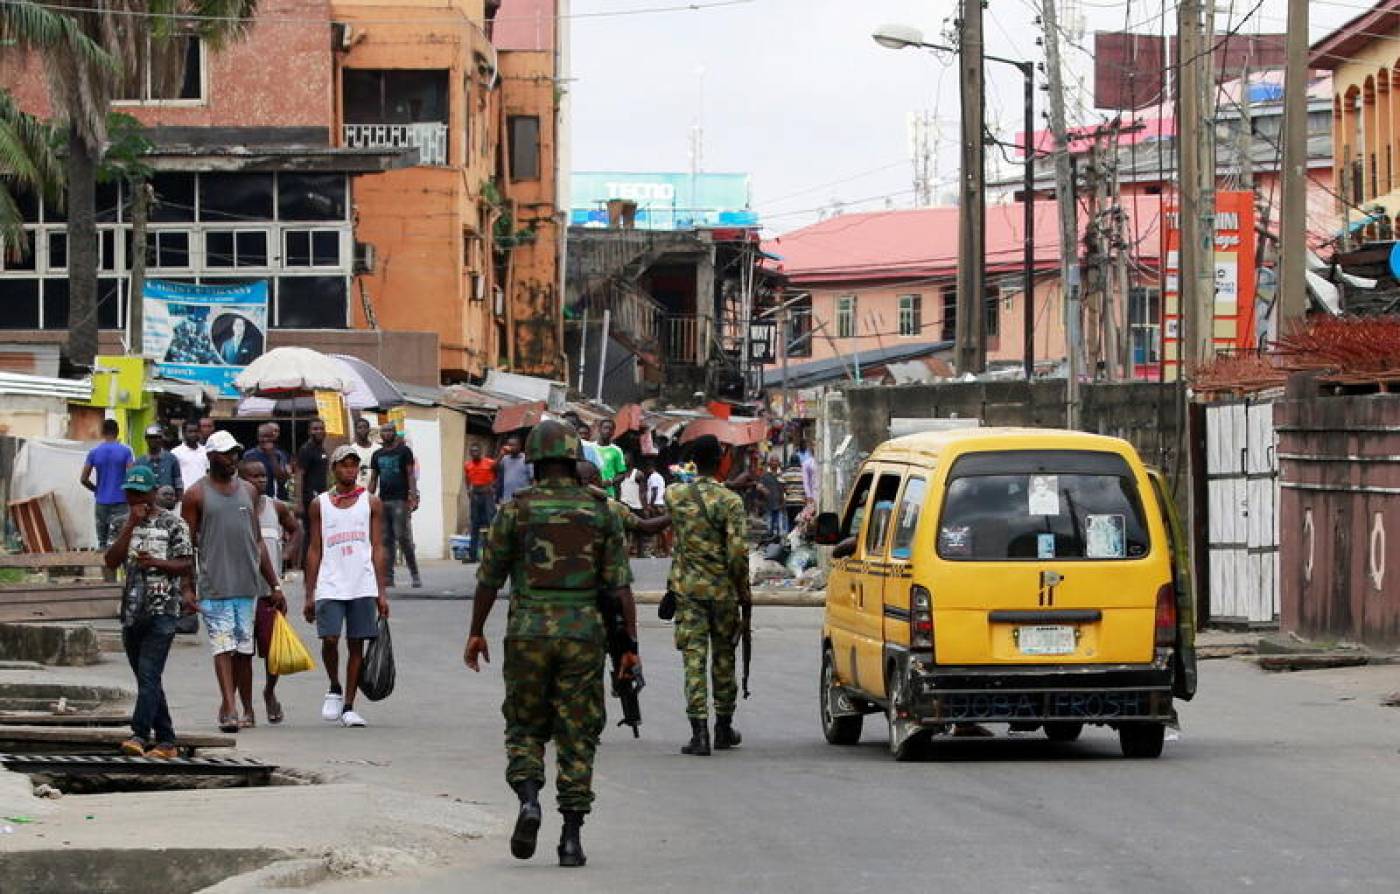 Armed gangs seen in Lagos as protests continue